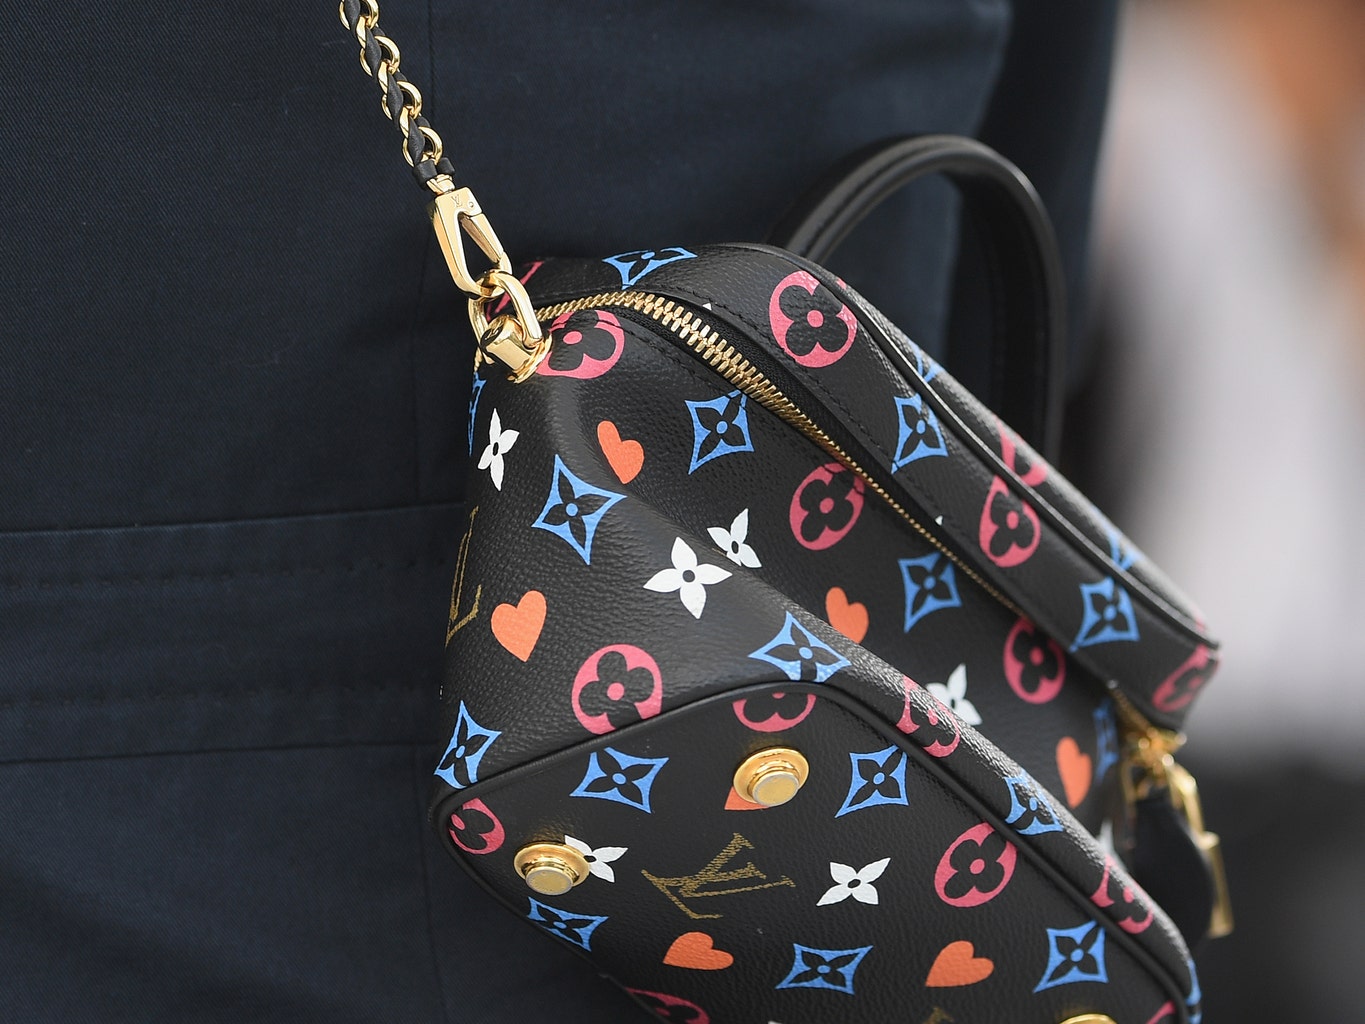 LVMH among luxury retailers looking cheap, Morgan Stanley says